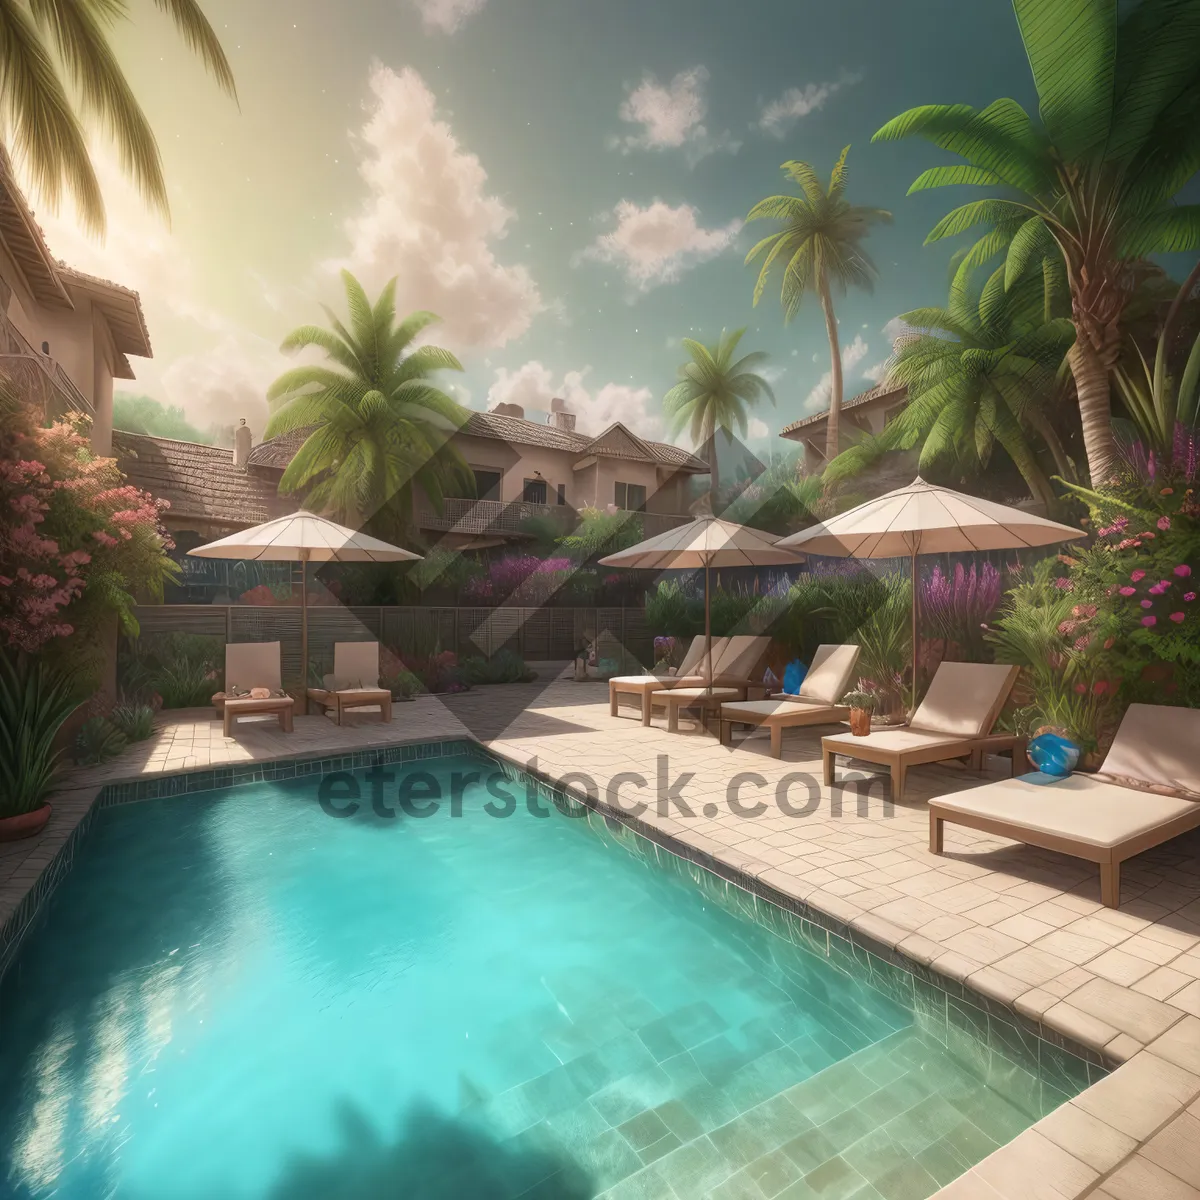 Picture of Tropical Luxury Getaway: Beachside Resort with Pool